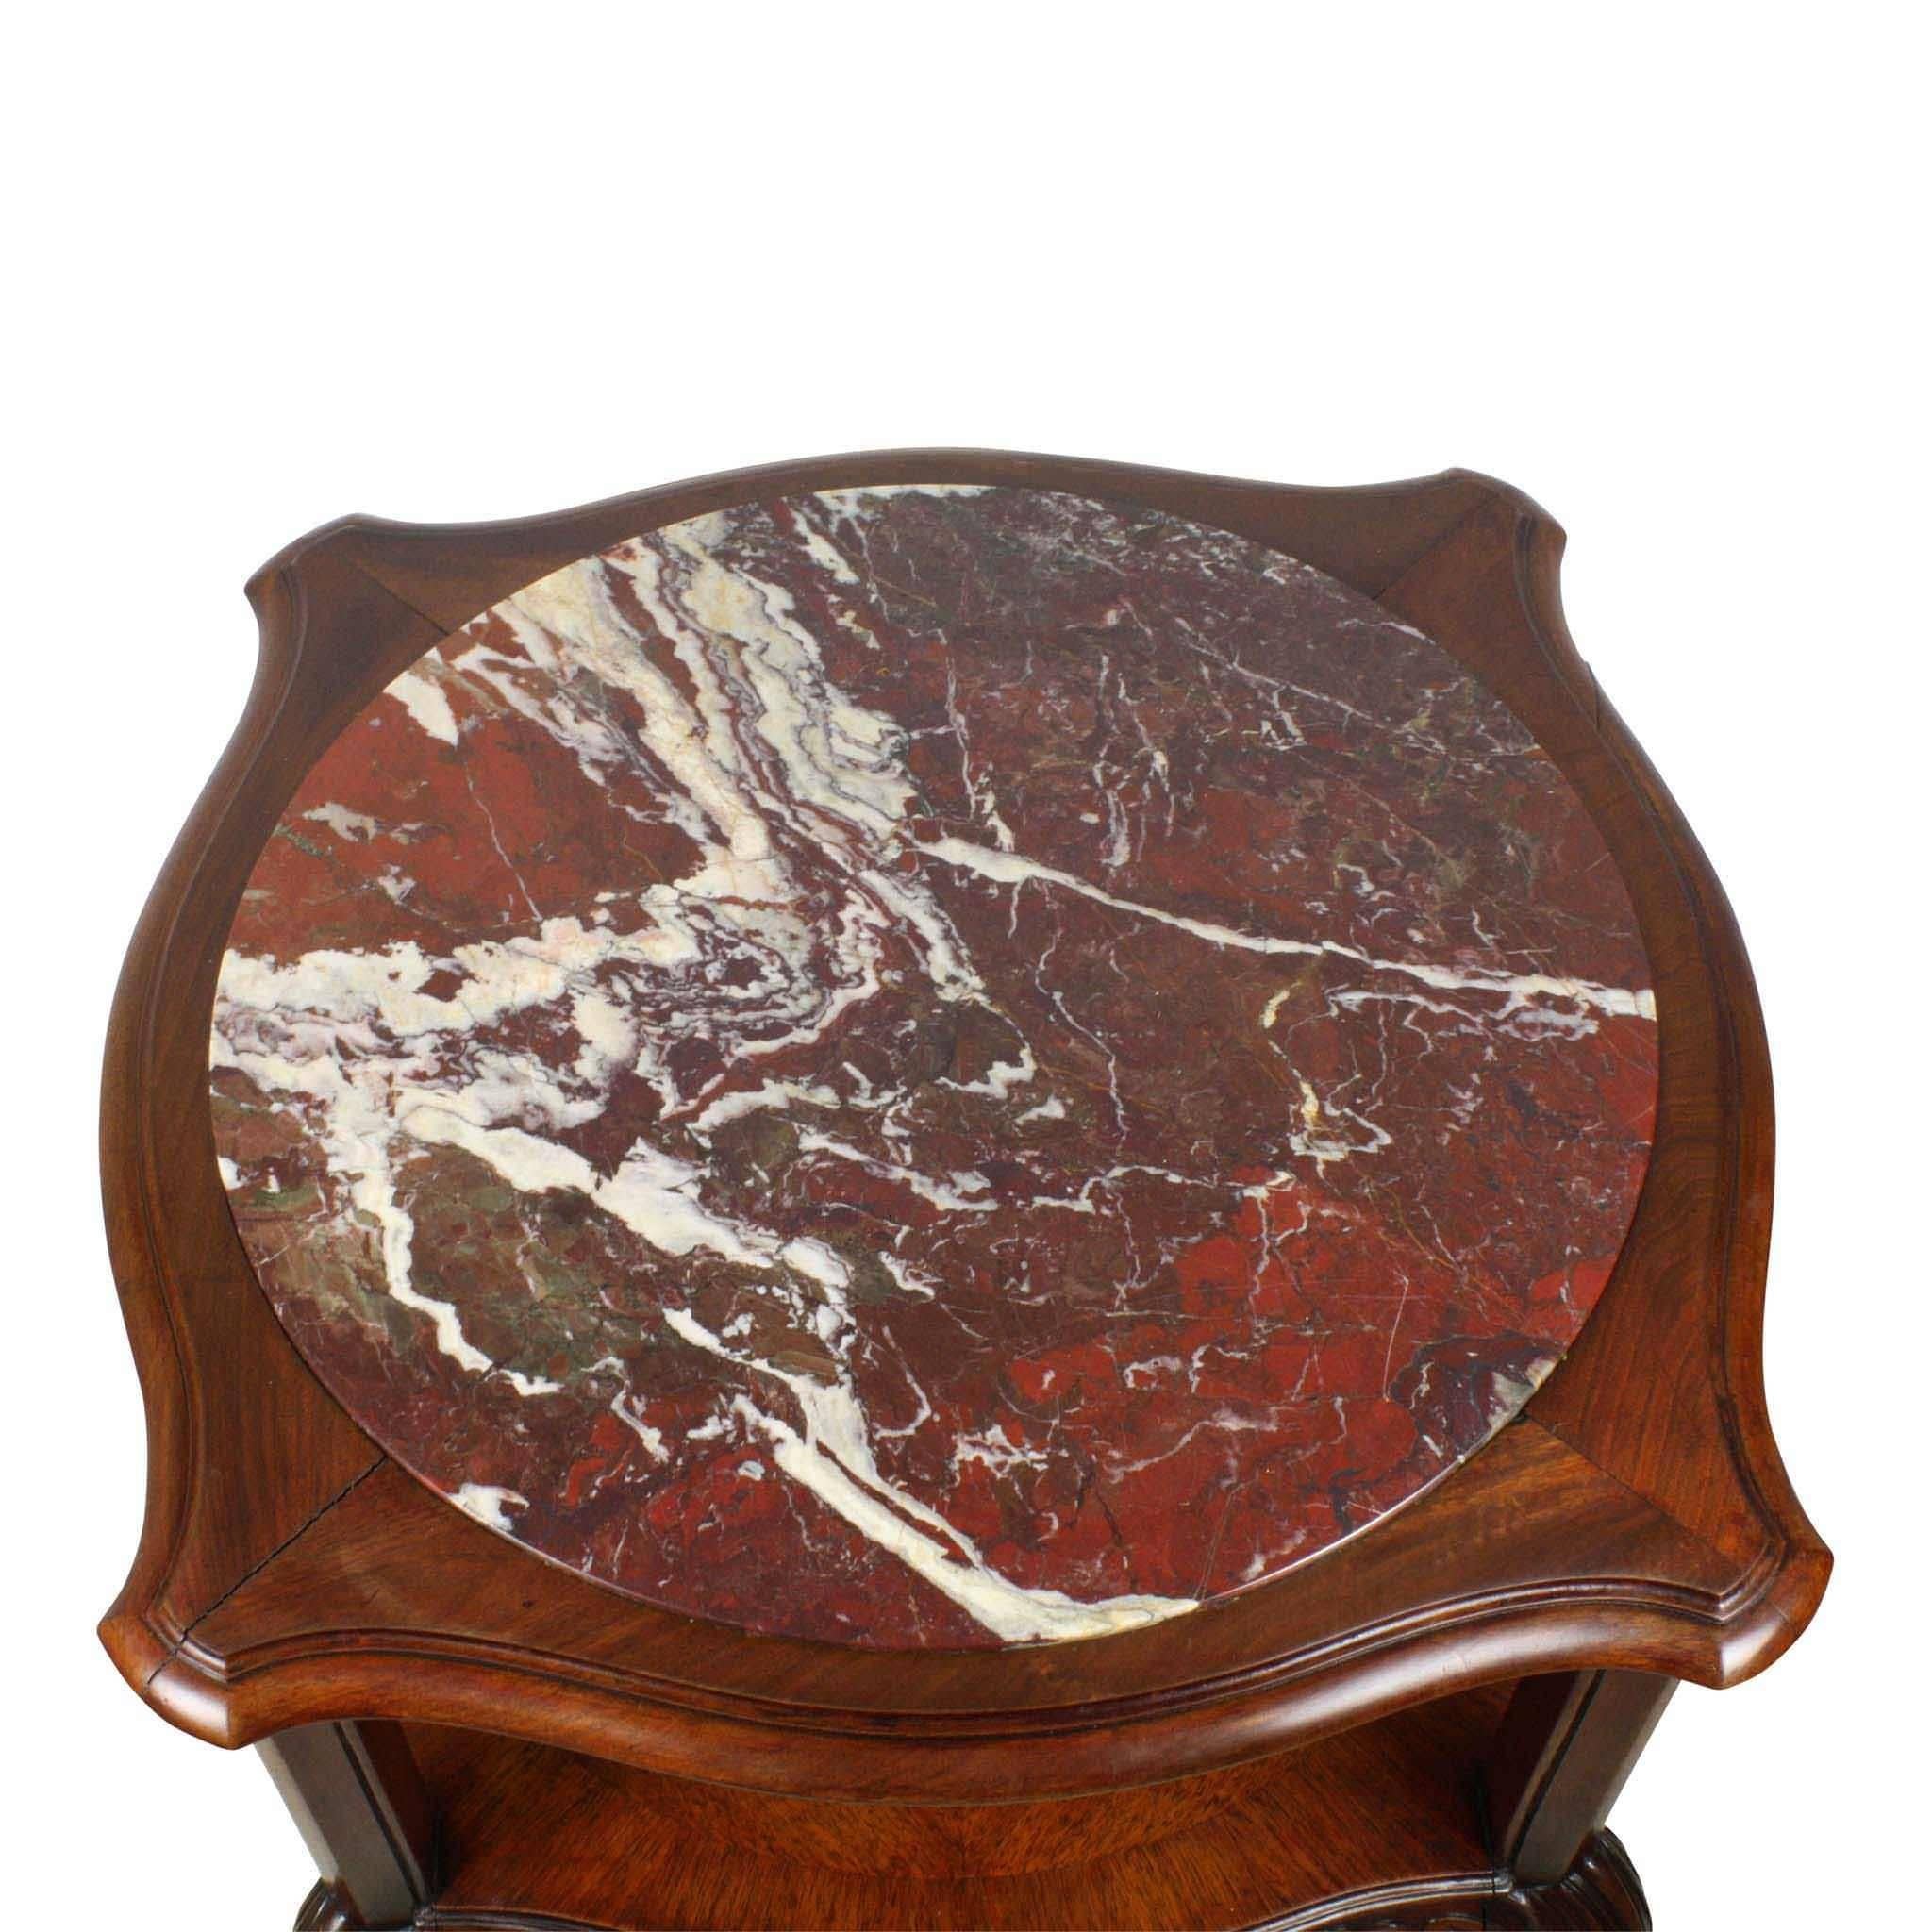 The rich red brown shade of the Griotte marble-top enhances the beauty of this walnut occasional table. The table is semicircular/semi square with simply carved decorative aprons around the top and lower shelf. In the typical style of Chippendale